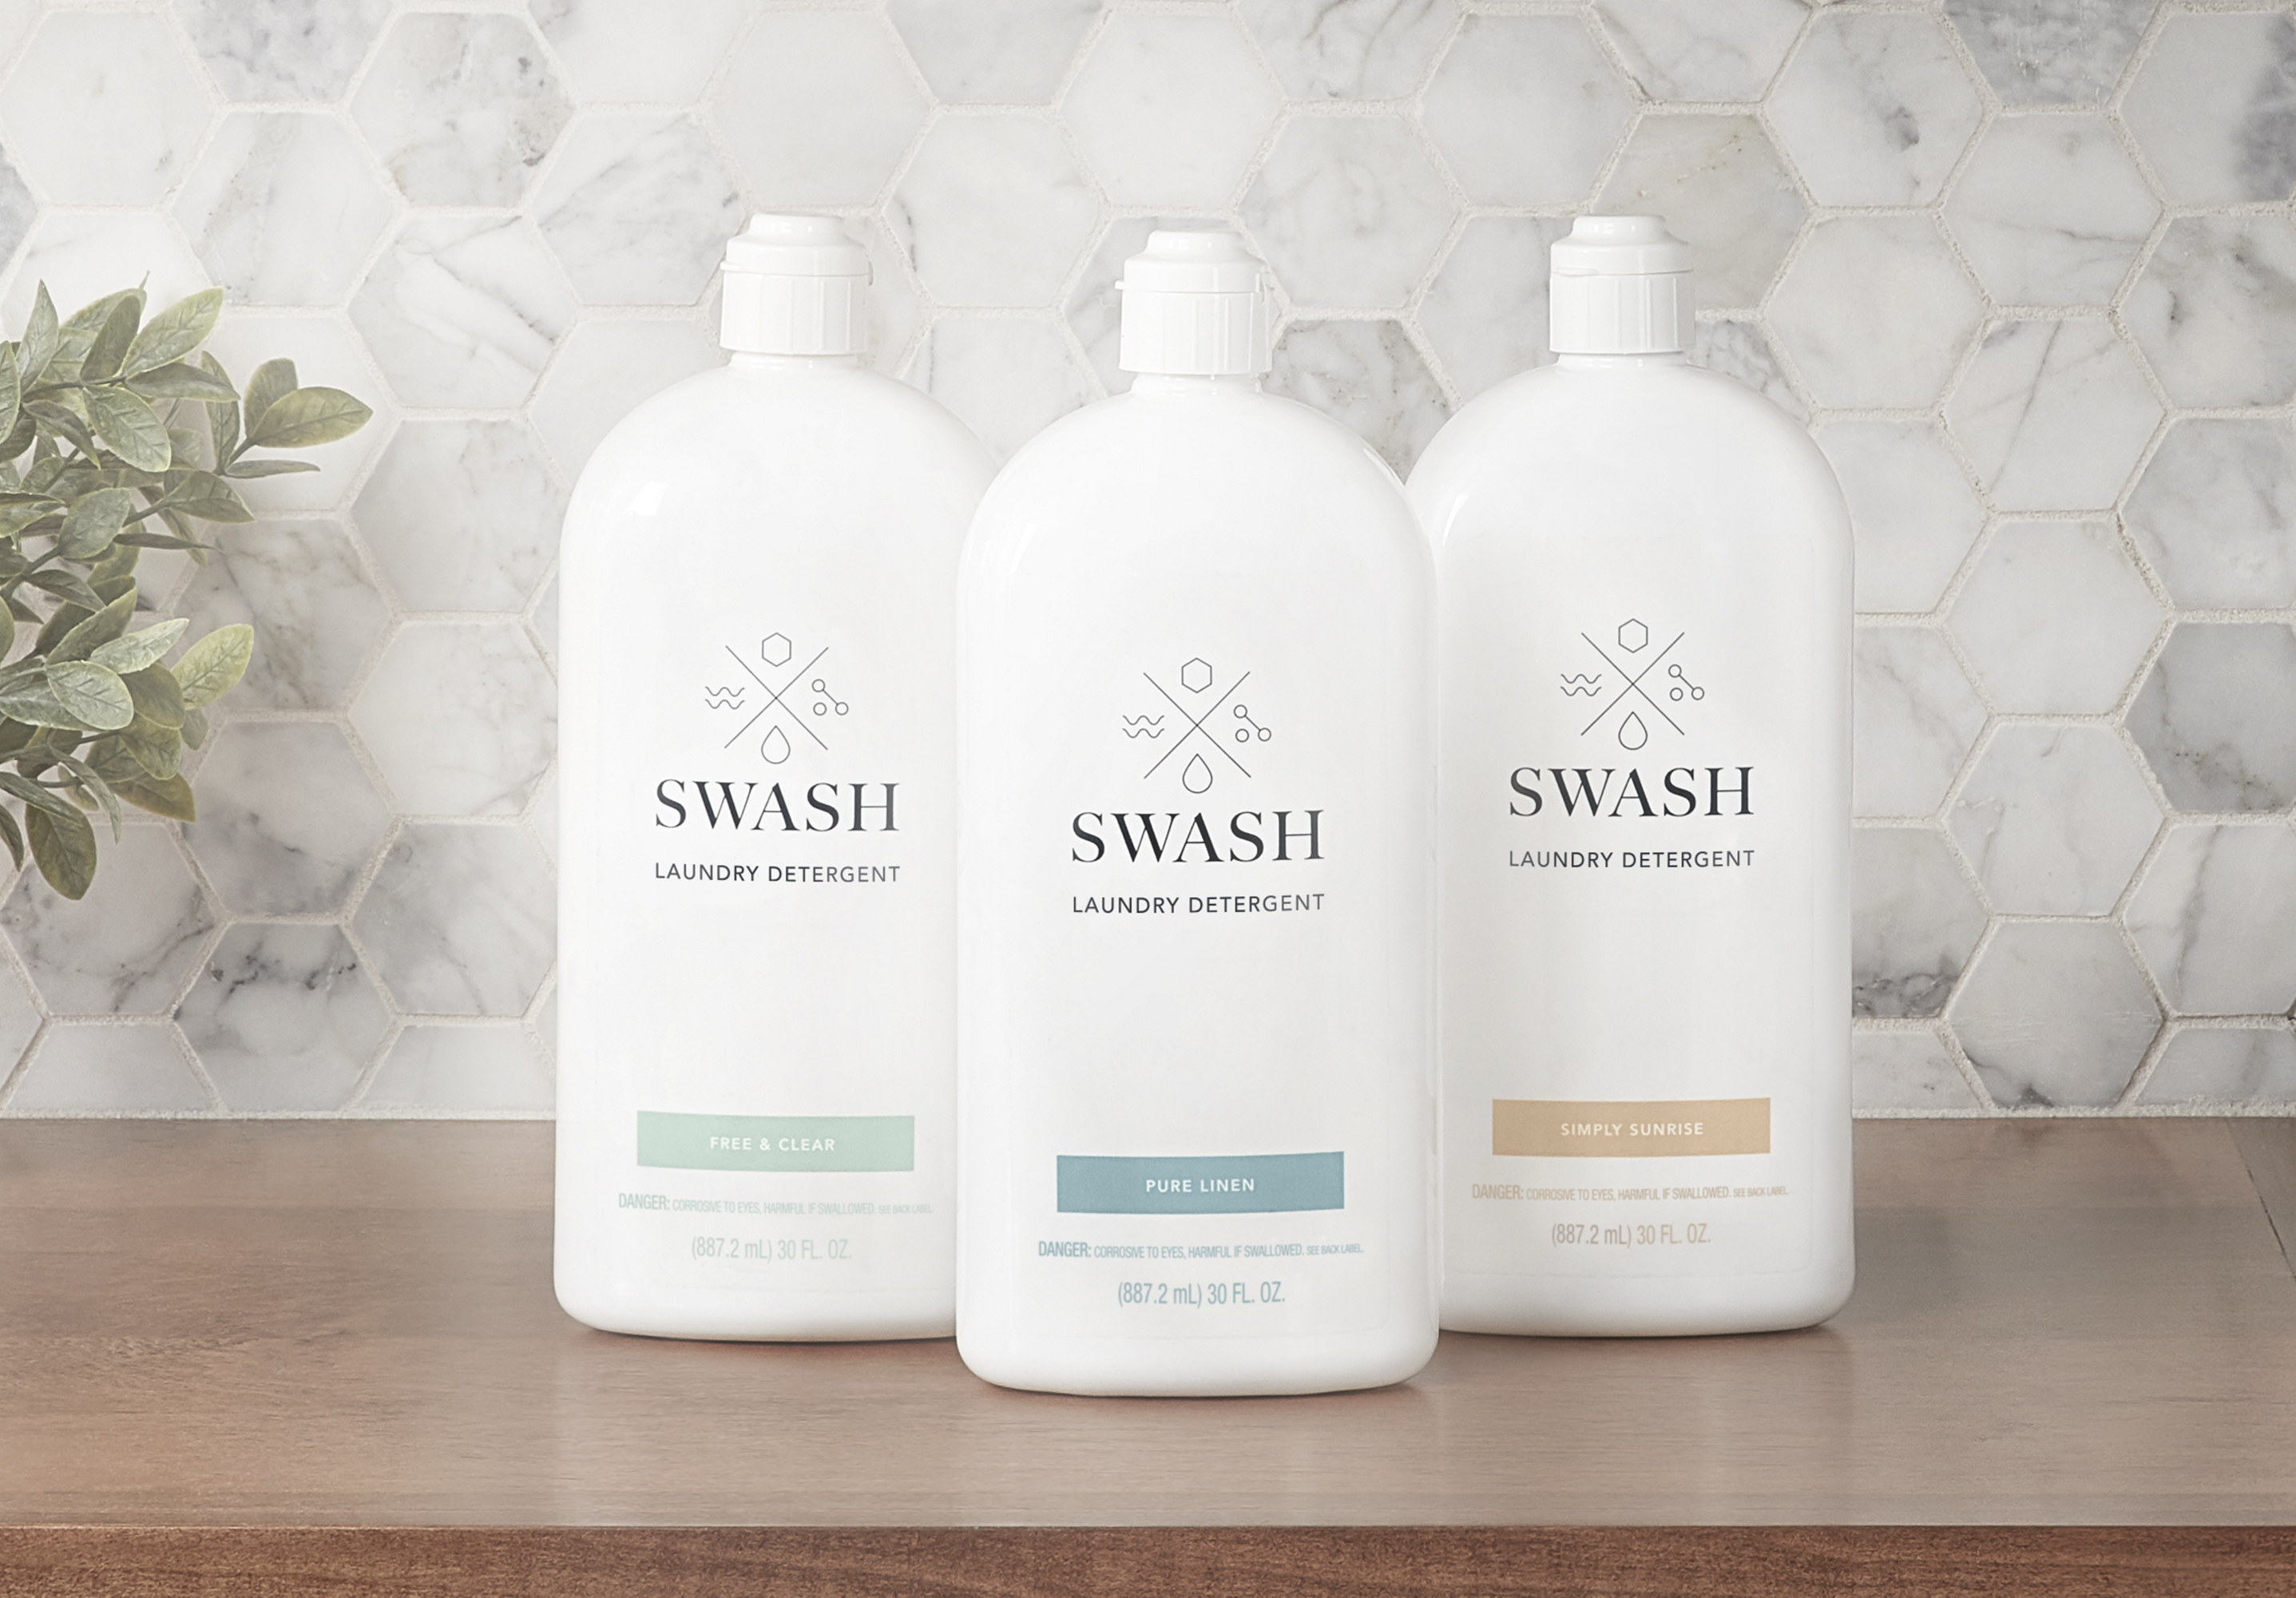 Swash Pure Linen, Free and Clear, and Simply Sunrise Laundry Detergent in sleek white bottles on a wooden surface